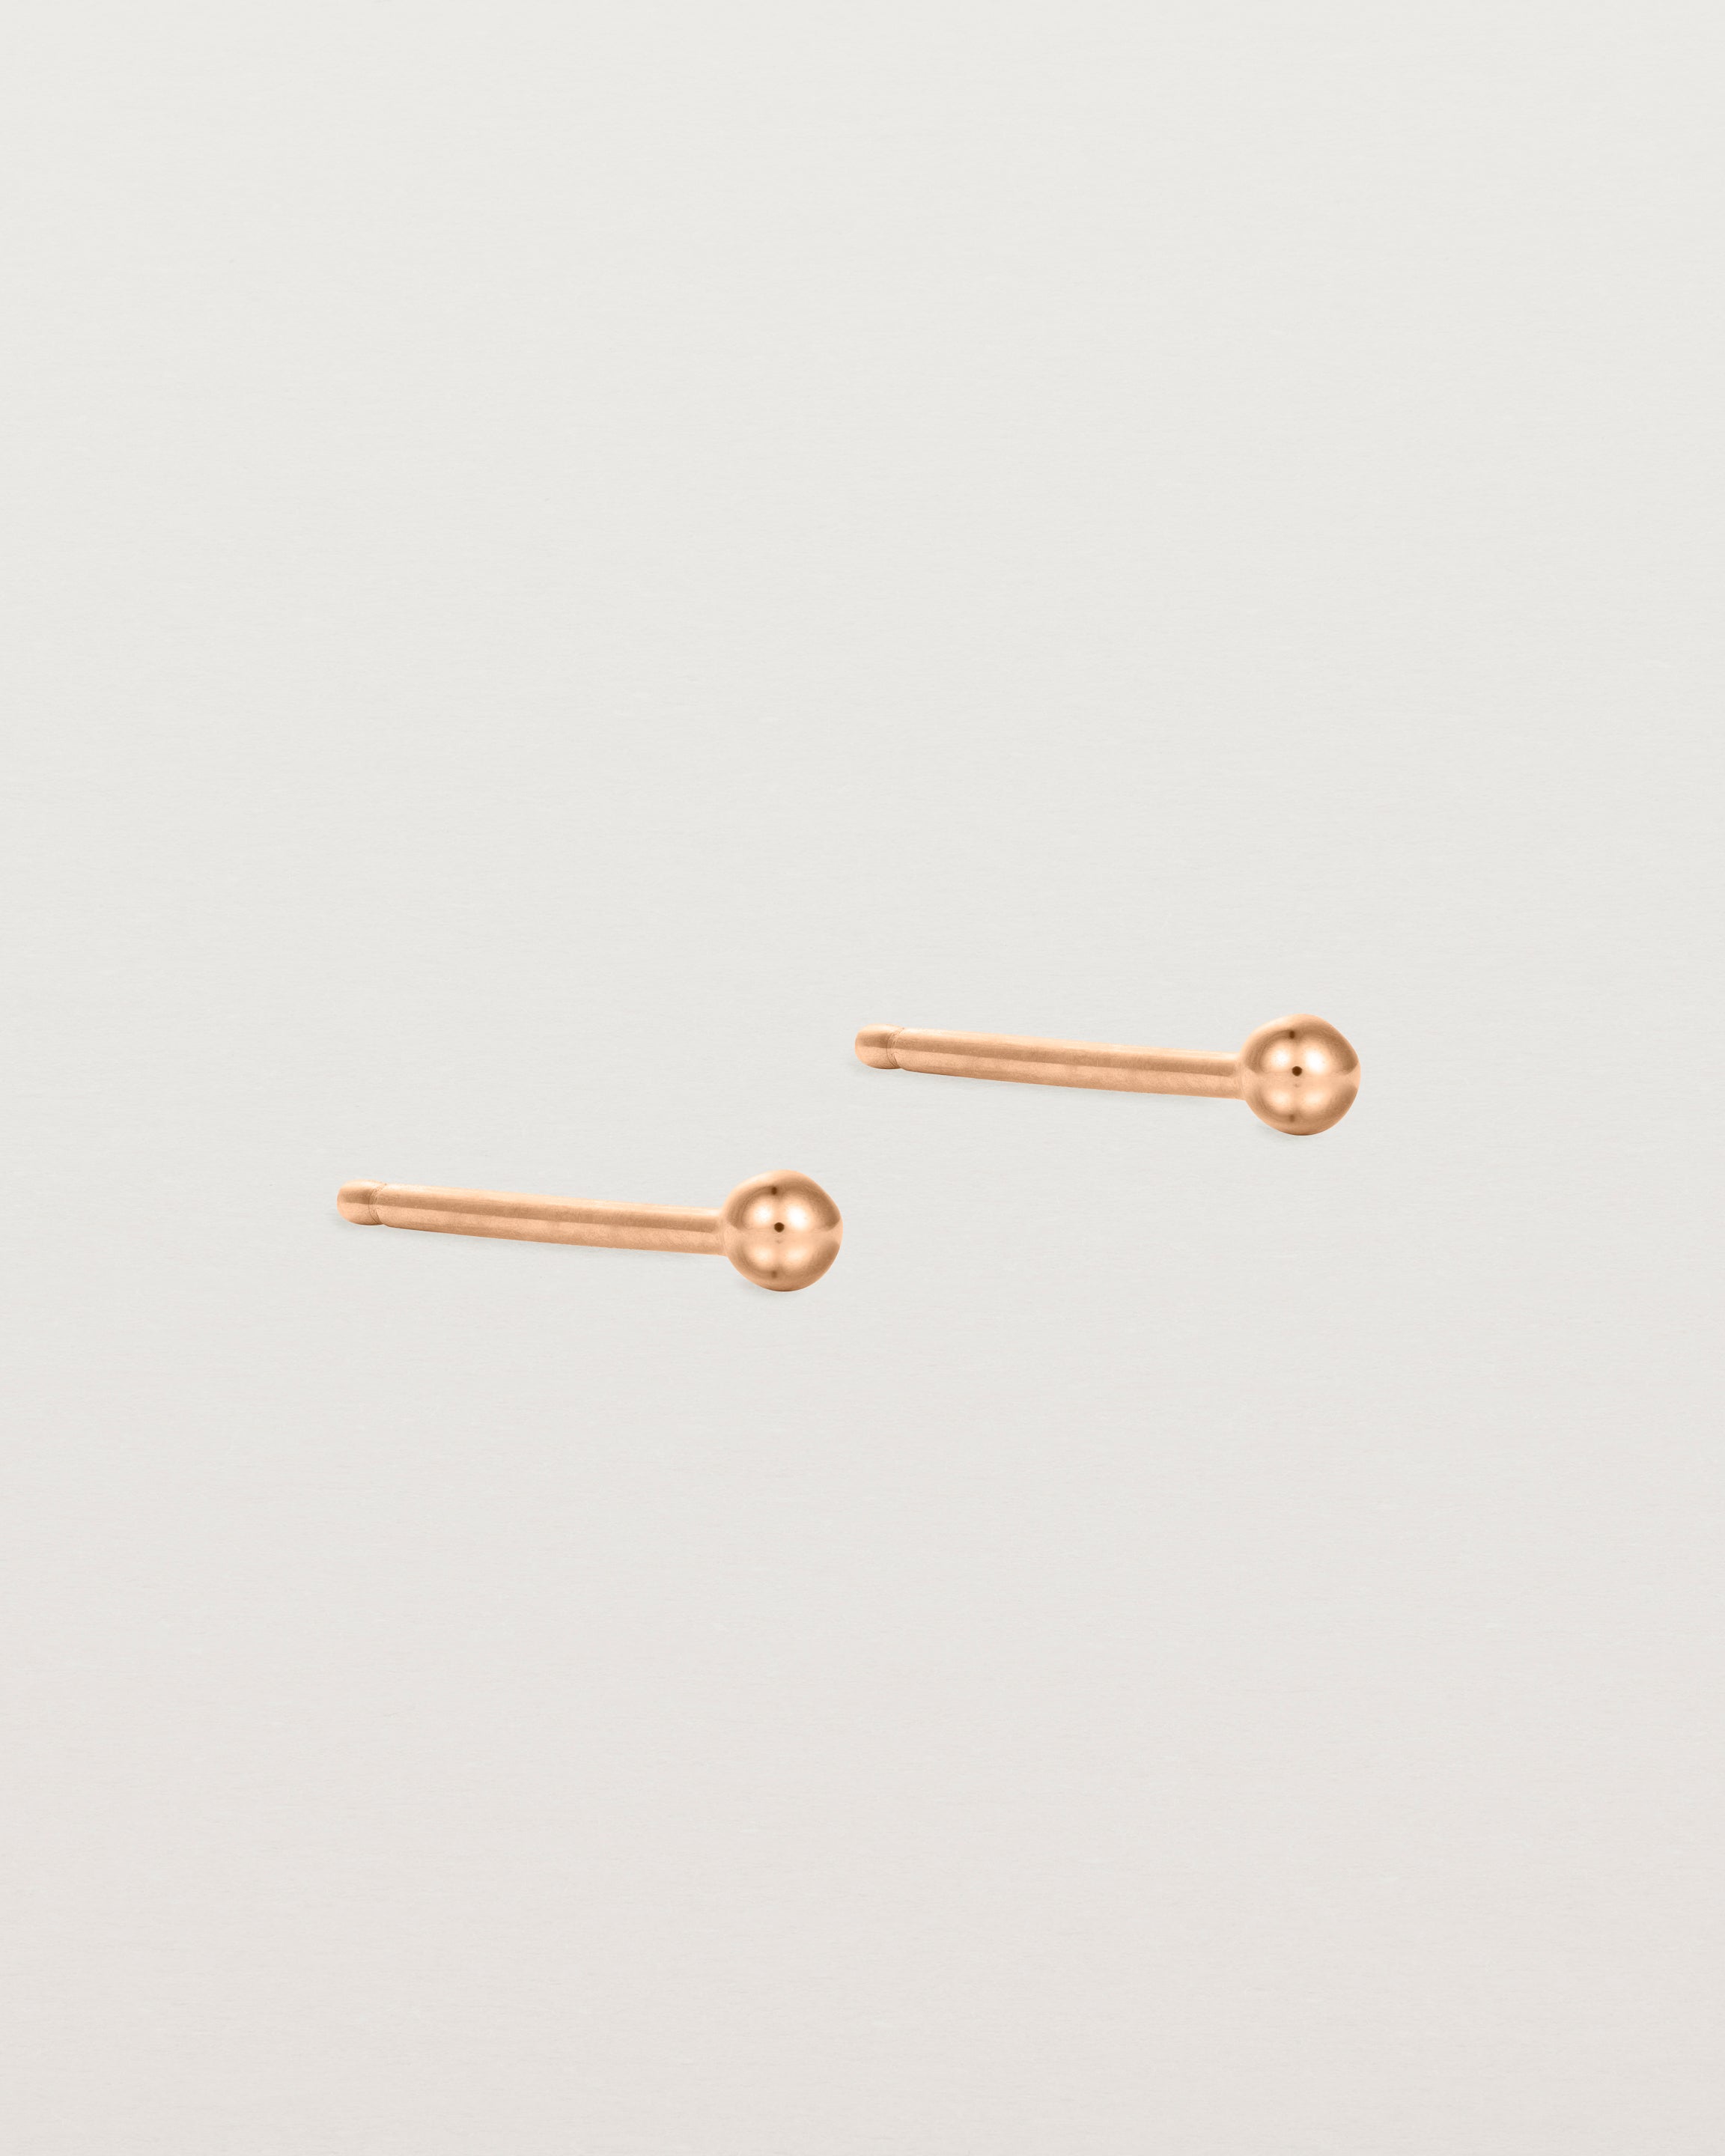 A pair of tiny rose gold studs featuring a round ball